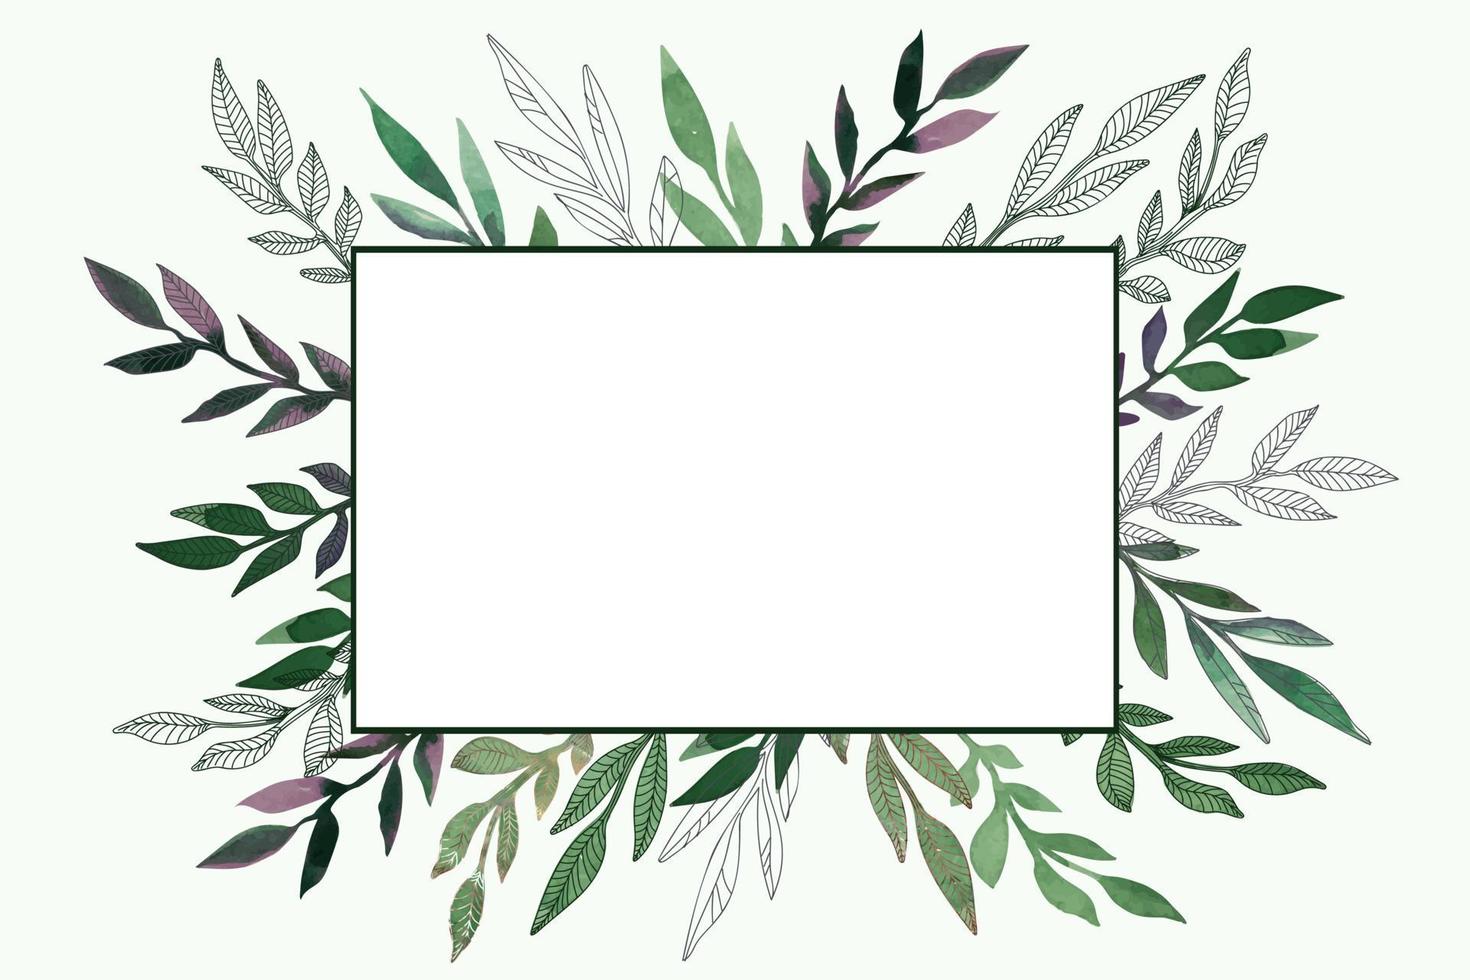 Vector frame with watercolor leaves. For invitations to a wedding, a bachelorette party, a boho party, a conservationist party.